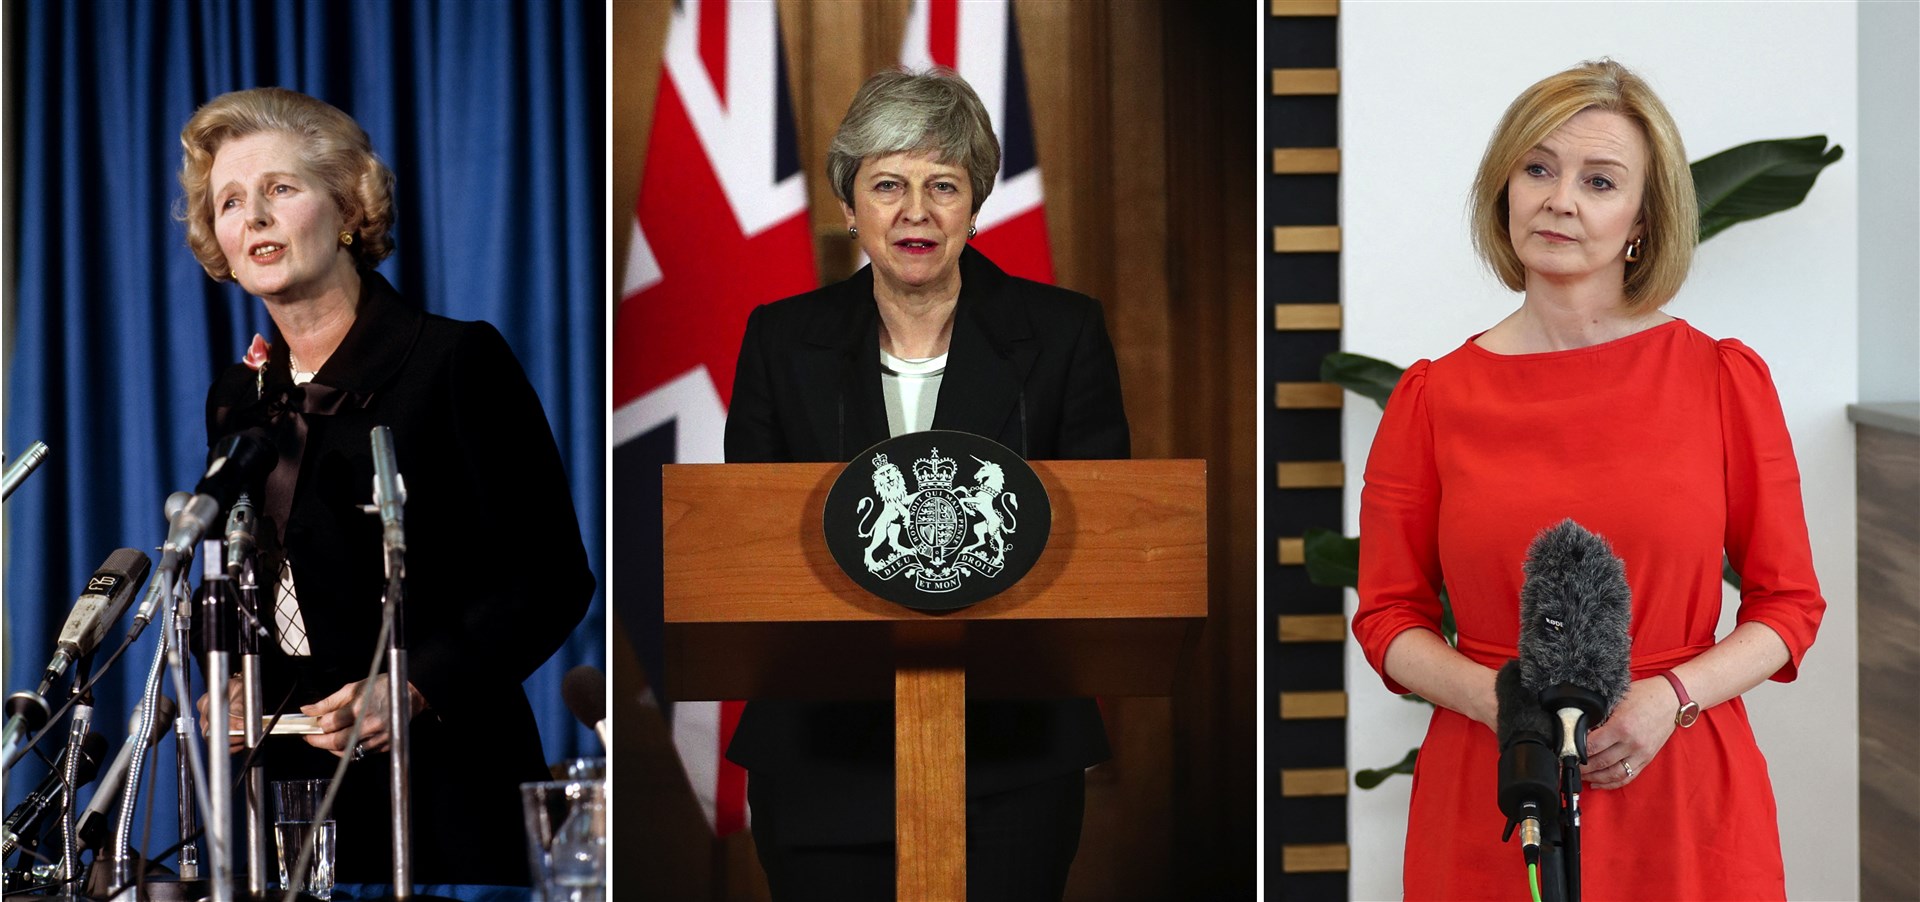 Margaret Thatcher, Theresa May and Liz Truss, who has secured her place as the UK’s third female prime minister after beating Rishi Sunak in the election for the leadership of the Conservative Party (PA)